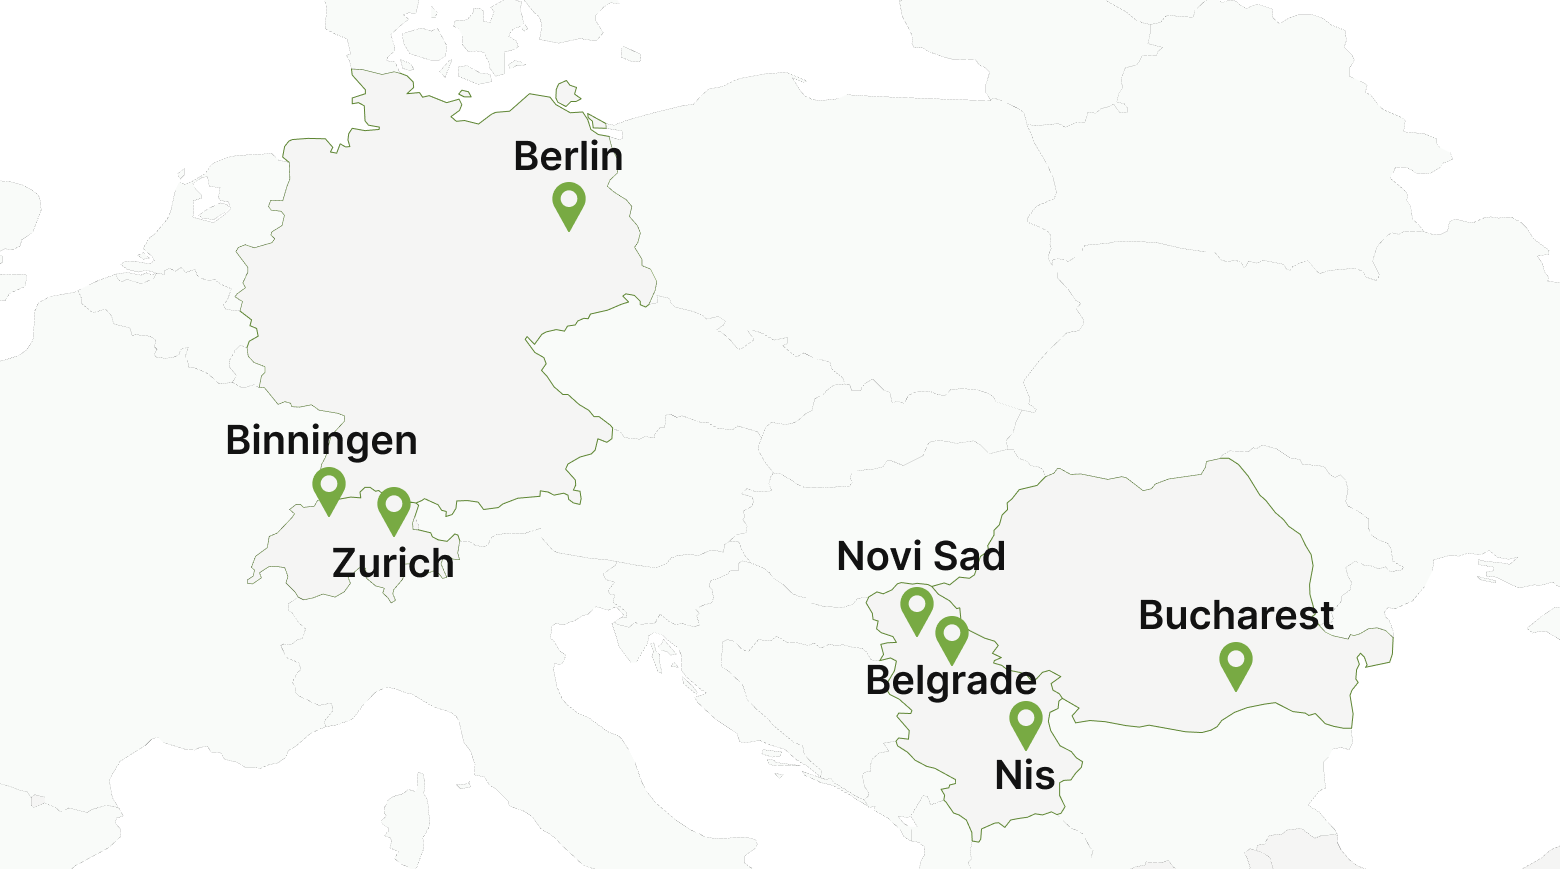 Holycode locatins on map of Europe